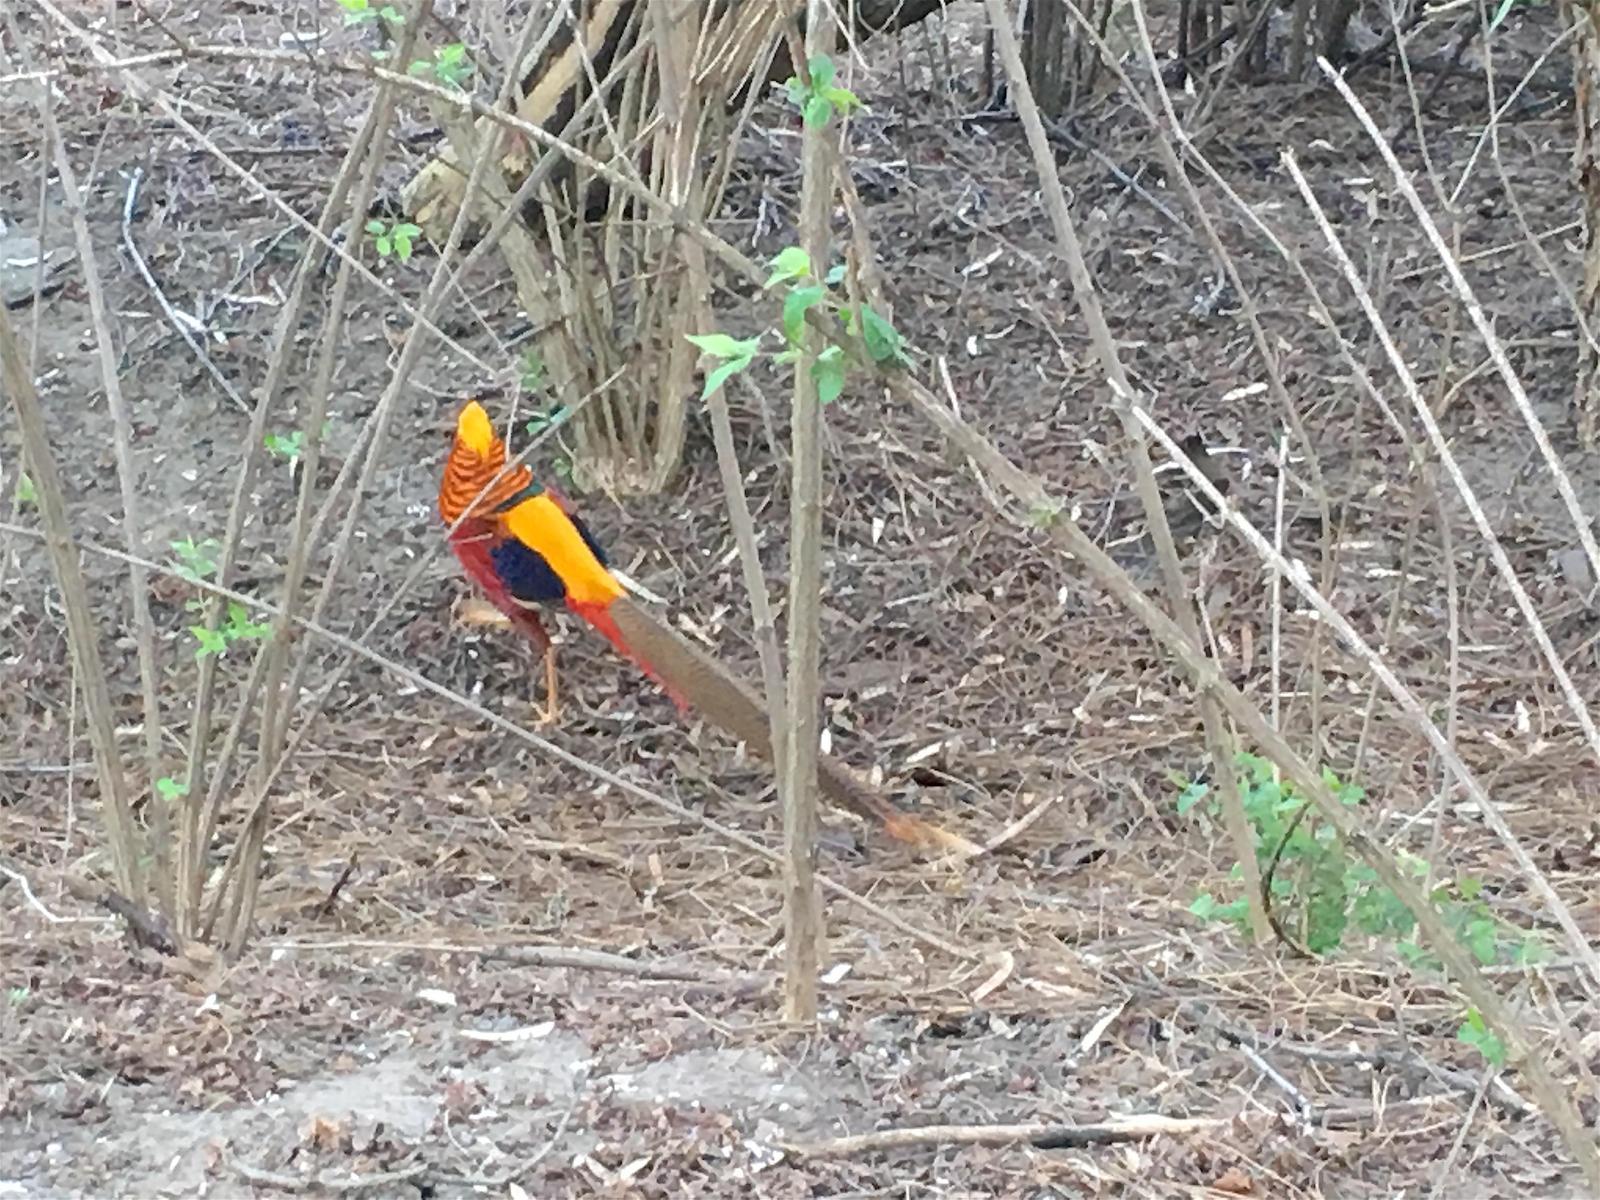 Golden Pheasant Photo by Kathryn Keith